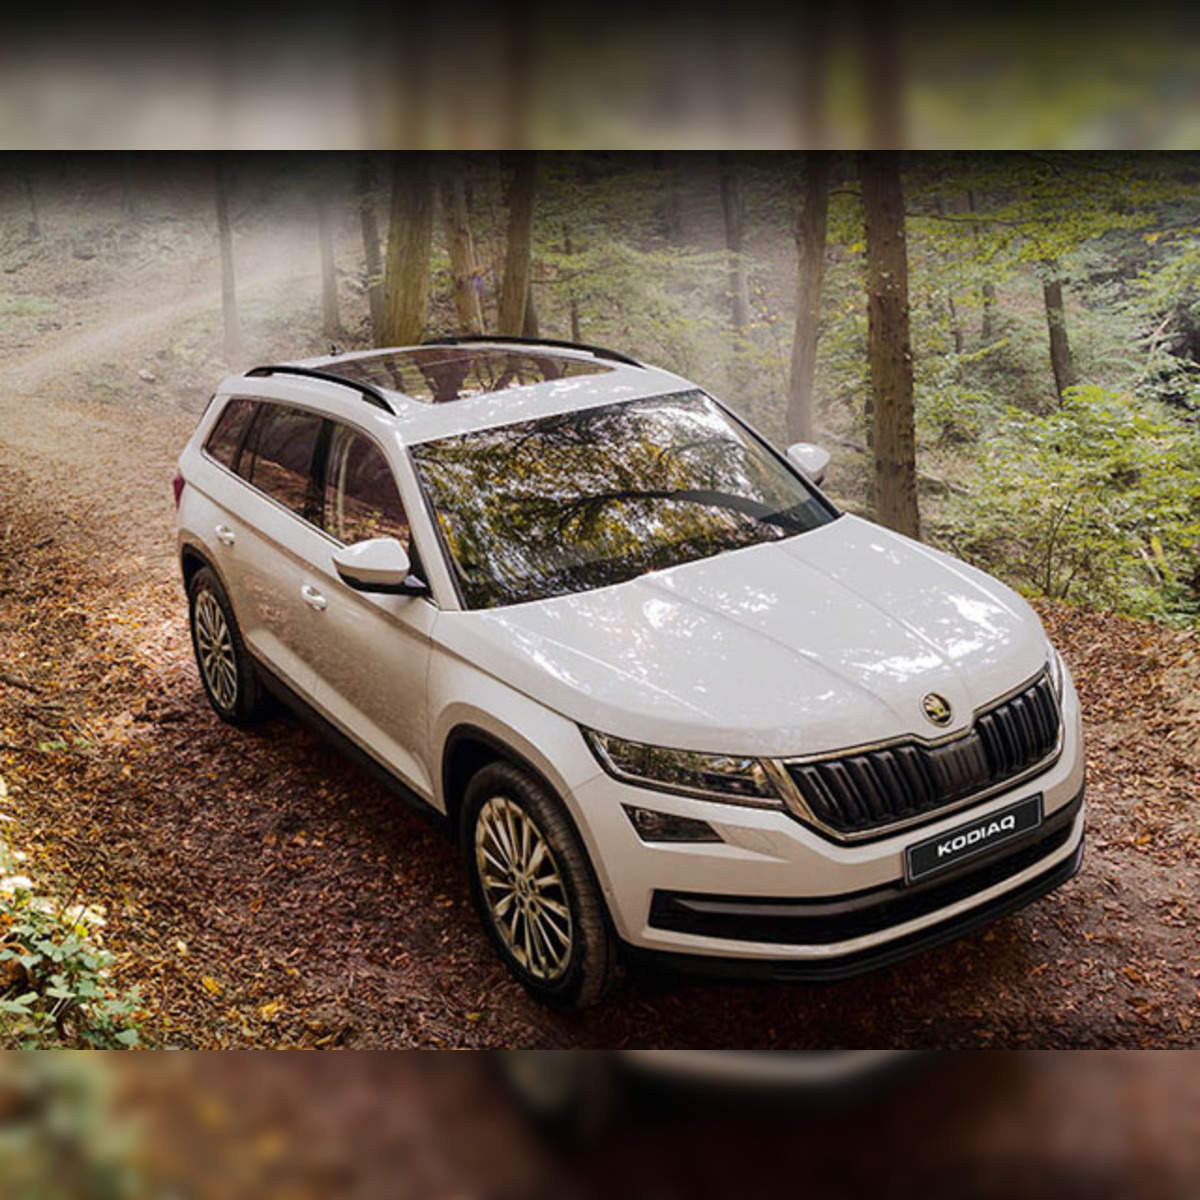 Skoda Kodiaq Live Life Suv Style New 7 Seater Launched At Rs 34 5 Lakh The Economic Times